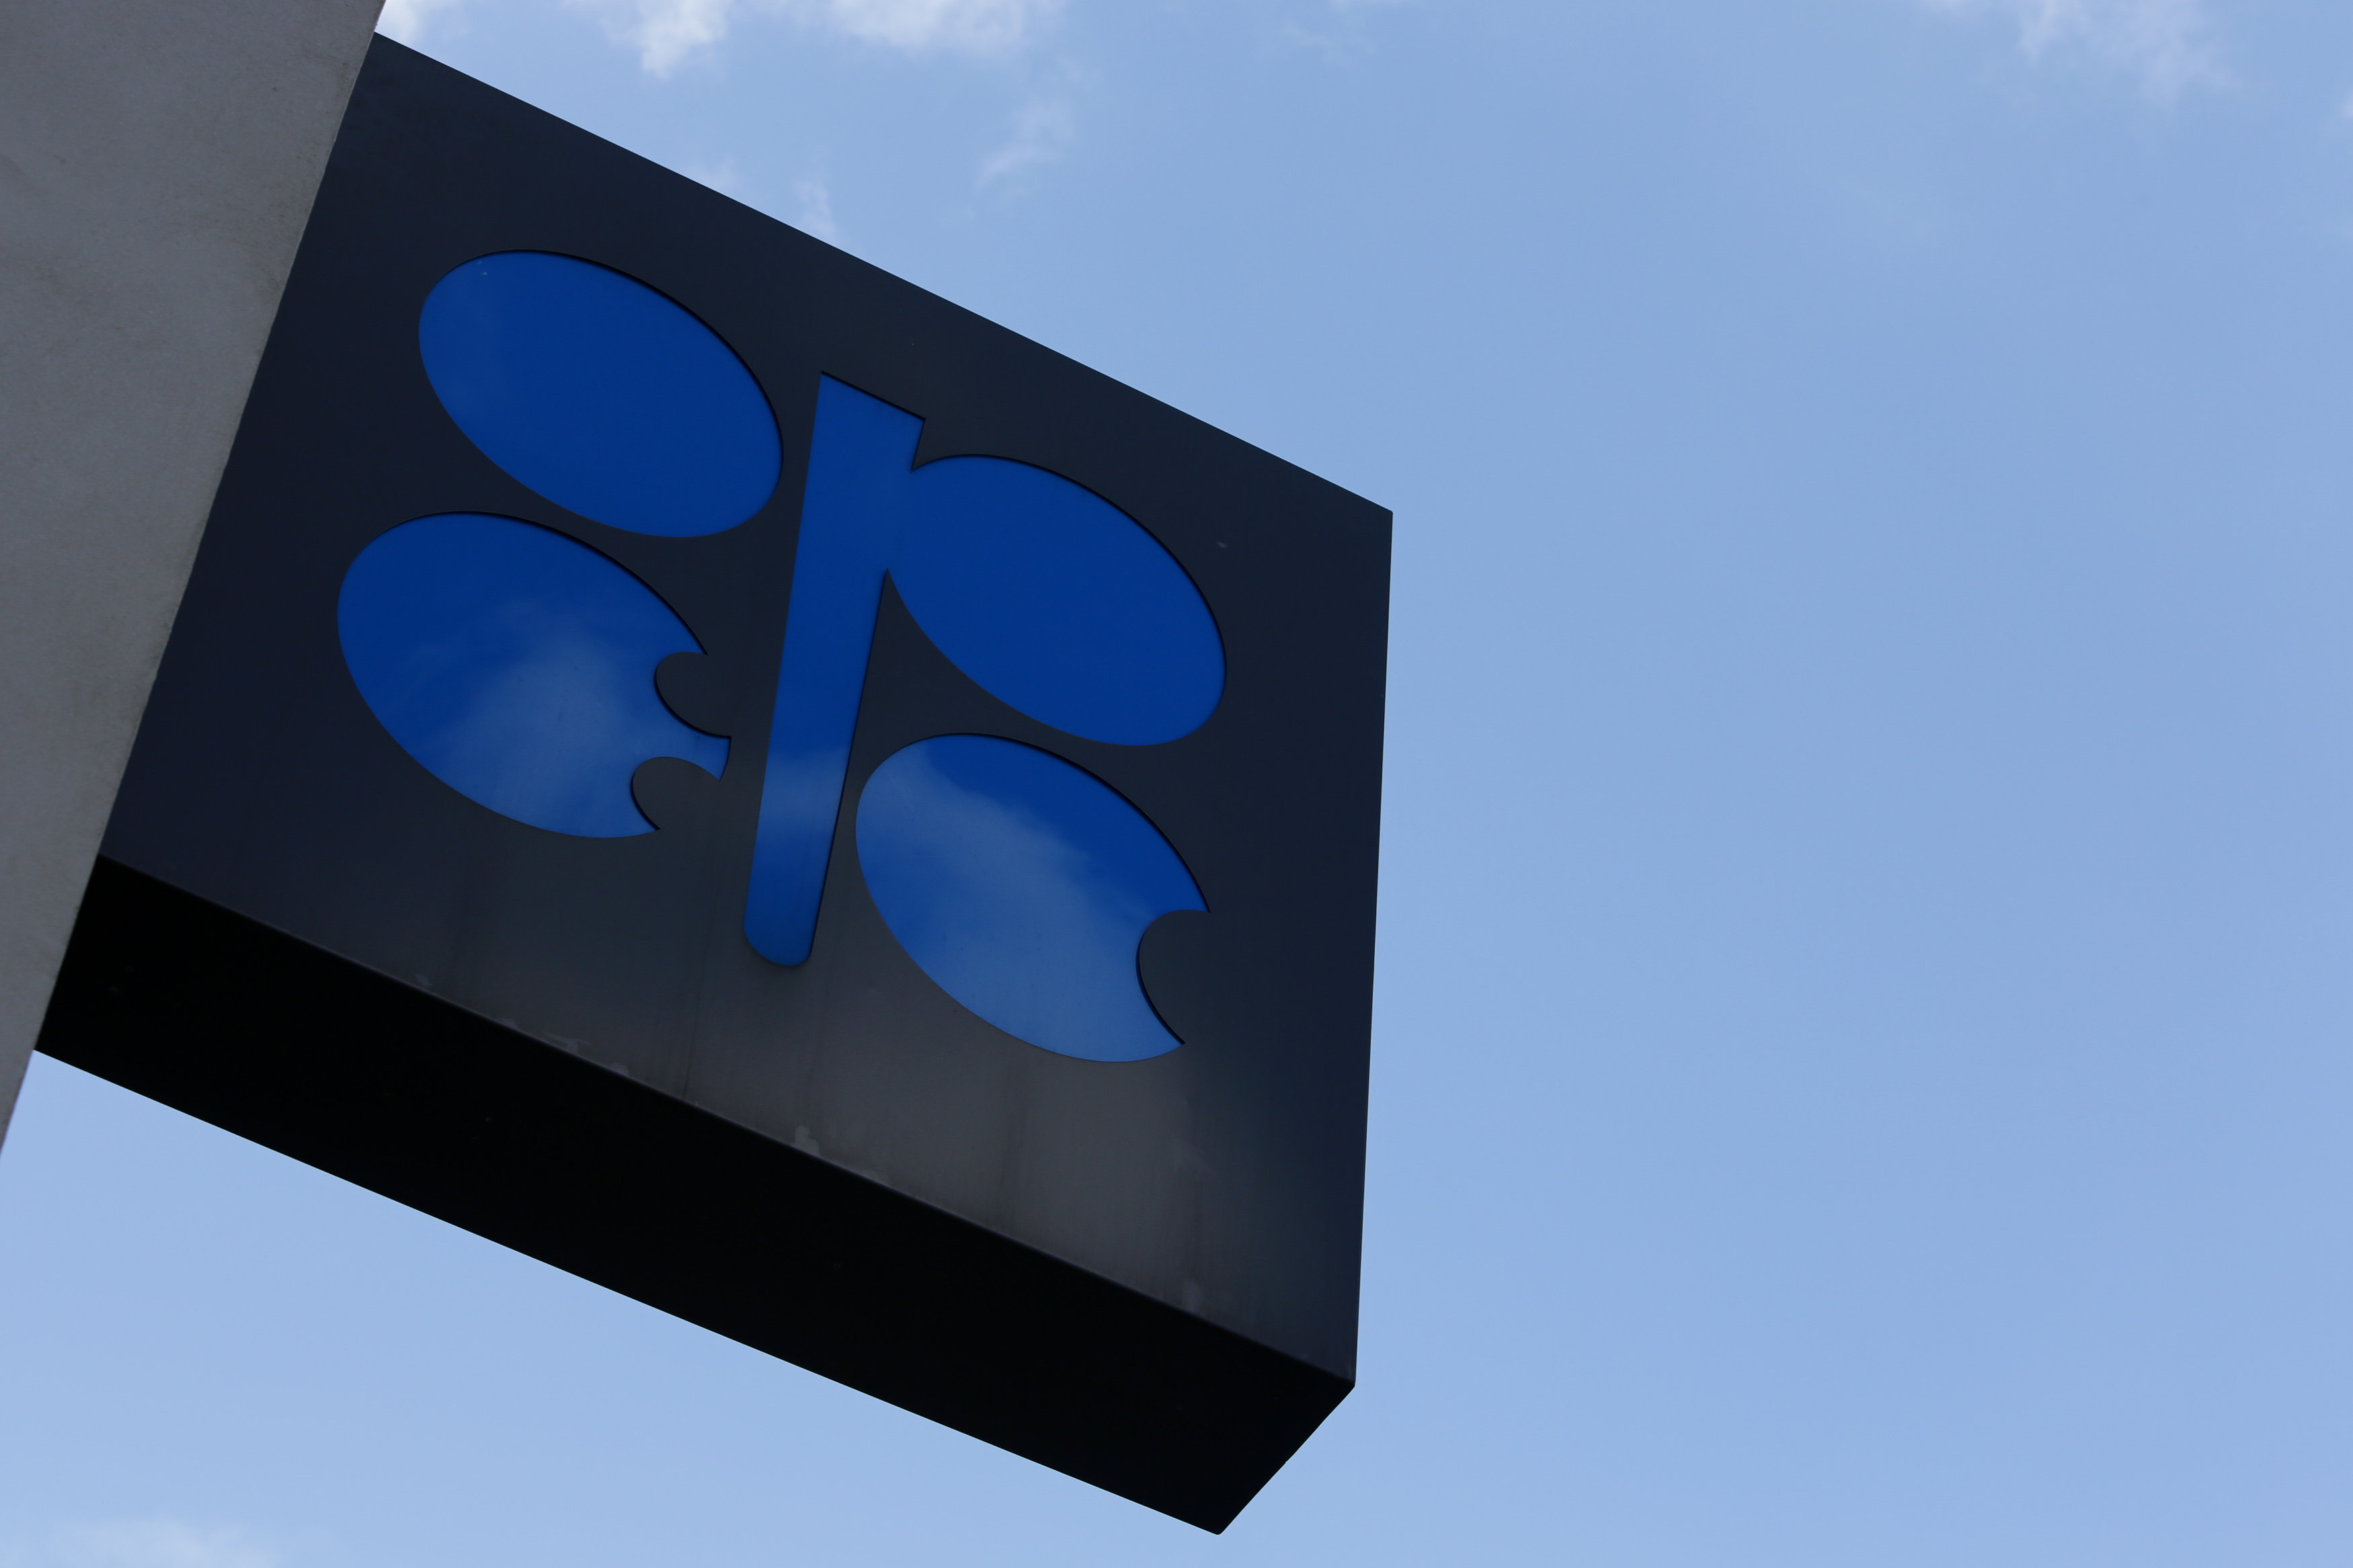 OPEC, key producers to discuss six-month oil deal